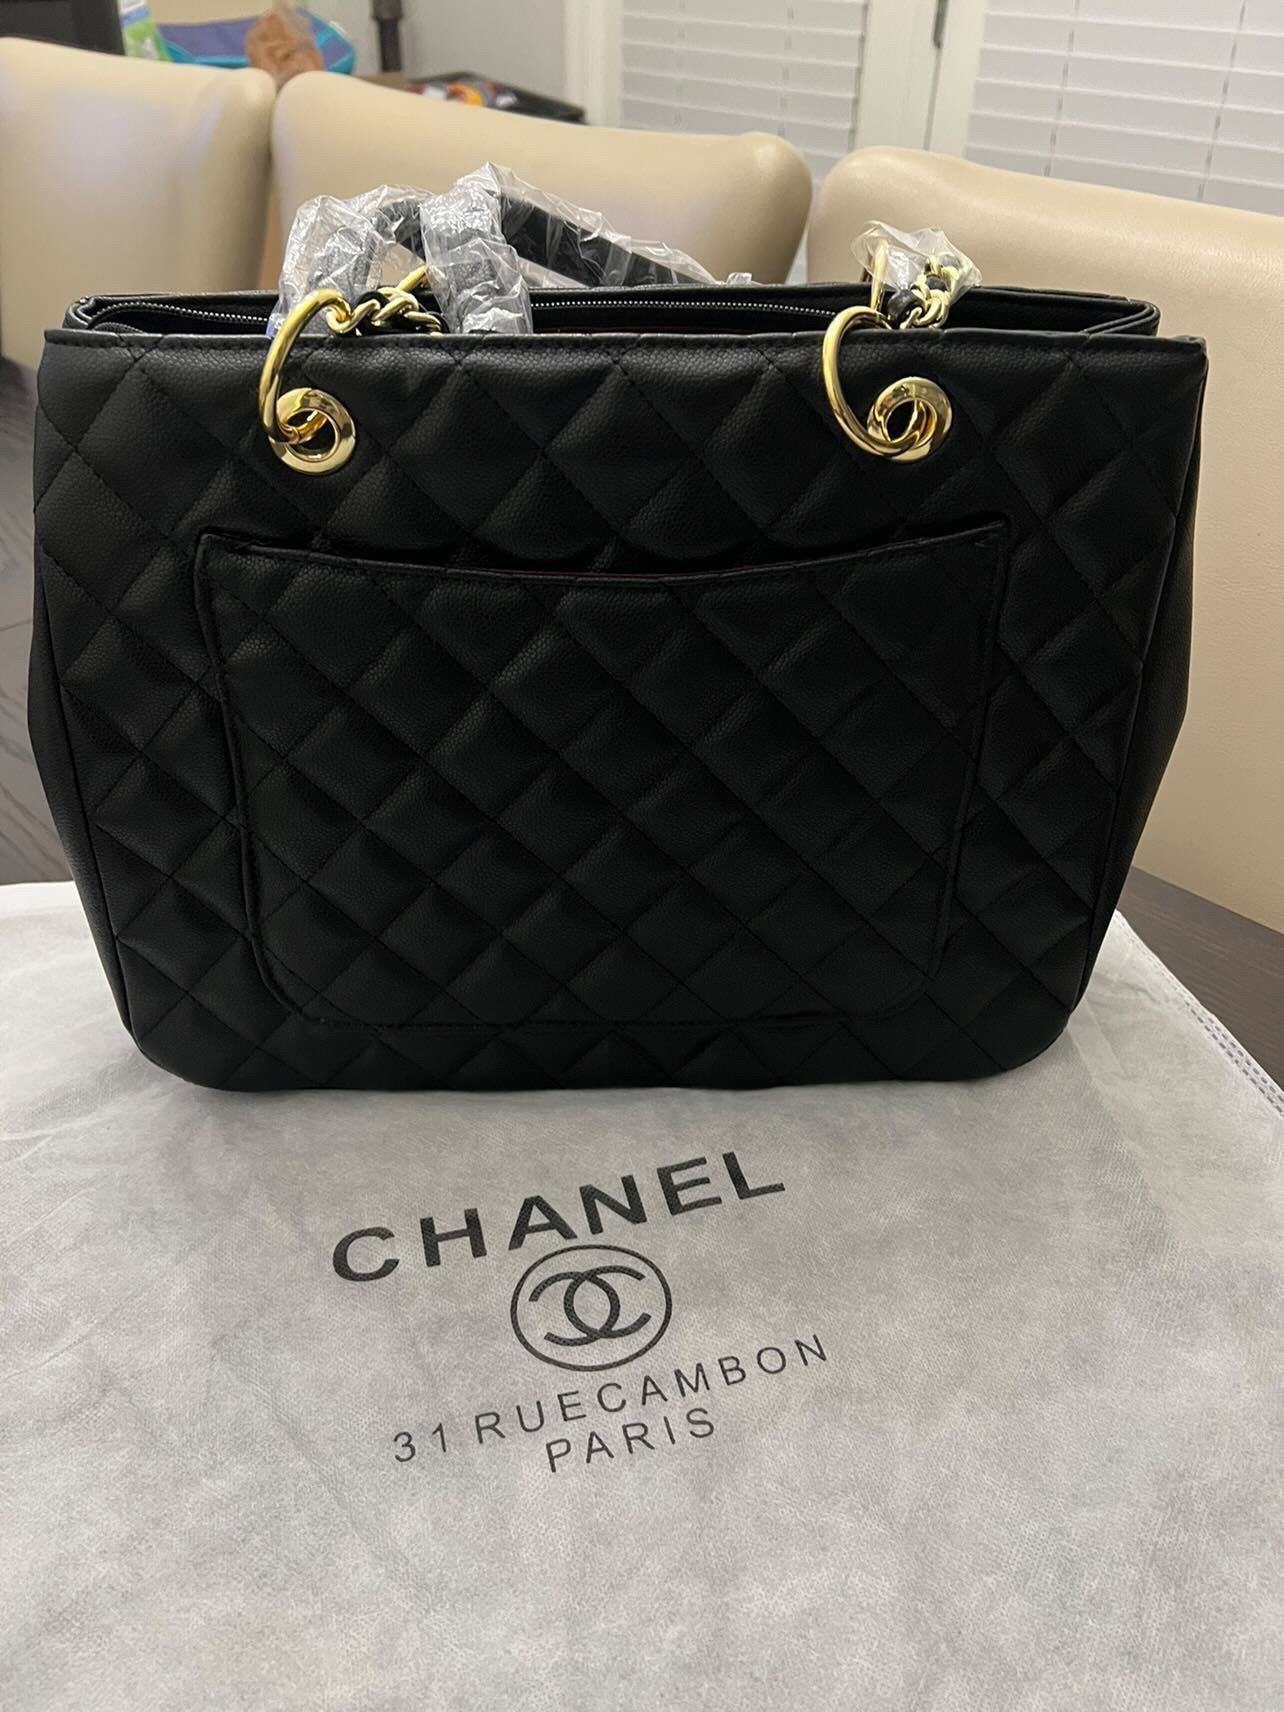 Classic Chanel Black Leather Tote Satchel w/ Clutch Purse – Rags 2